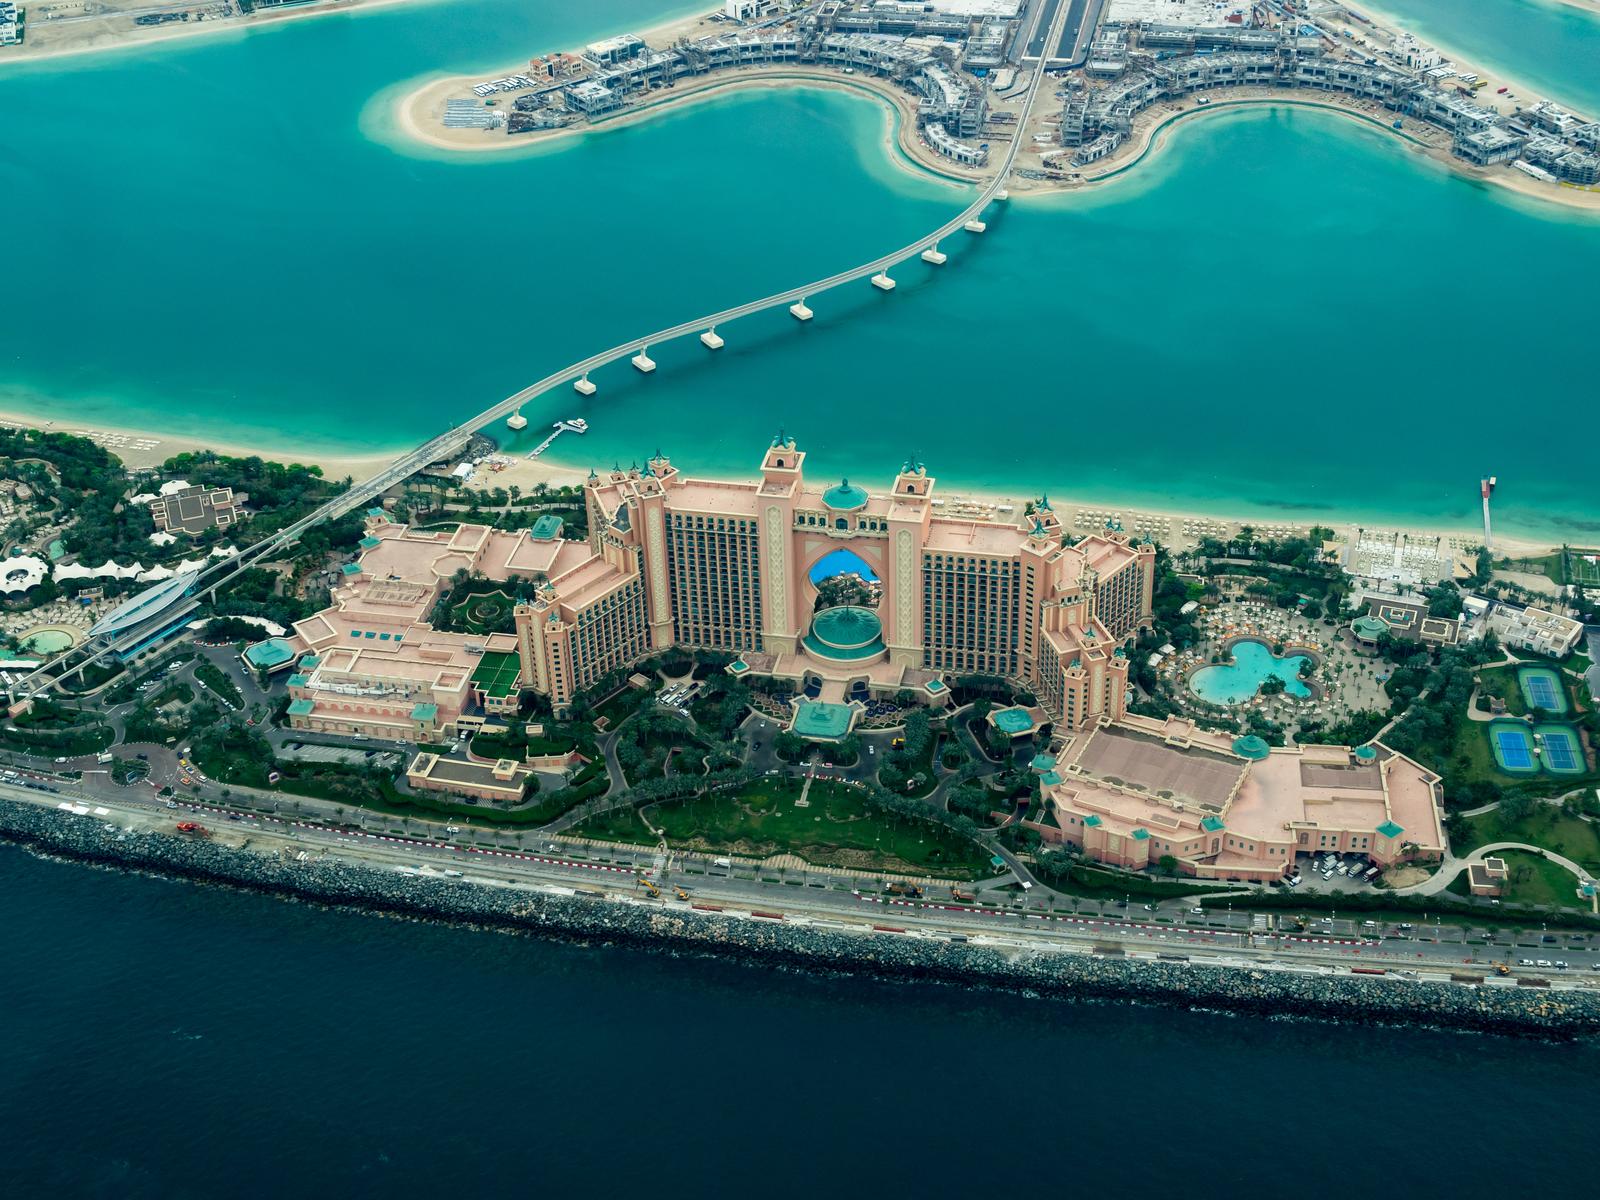 You got: Atlantis, The Palm! Eat a Mega Meal and We’ll Reveal the Vacation Spot You’d Feel Most at Home in Using the Magic of AI